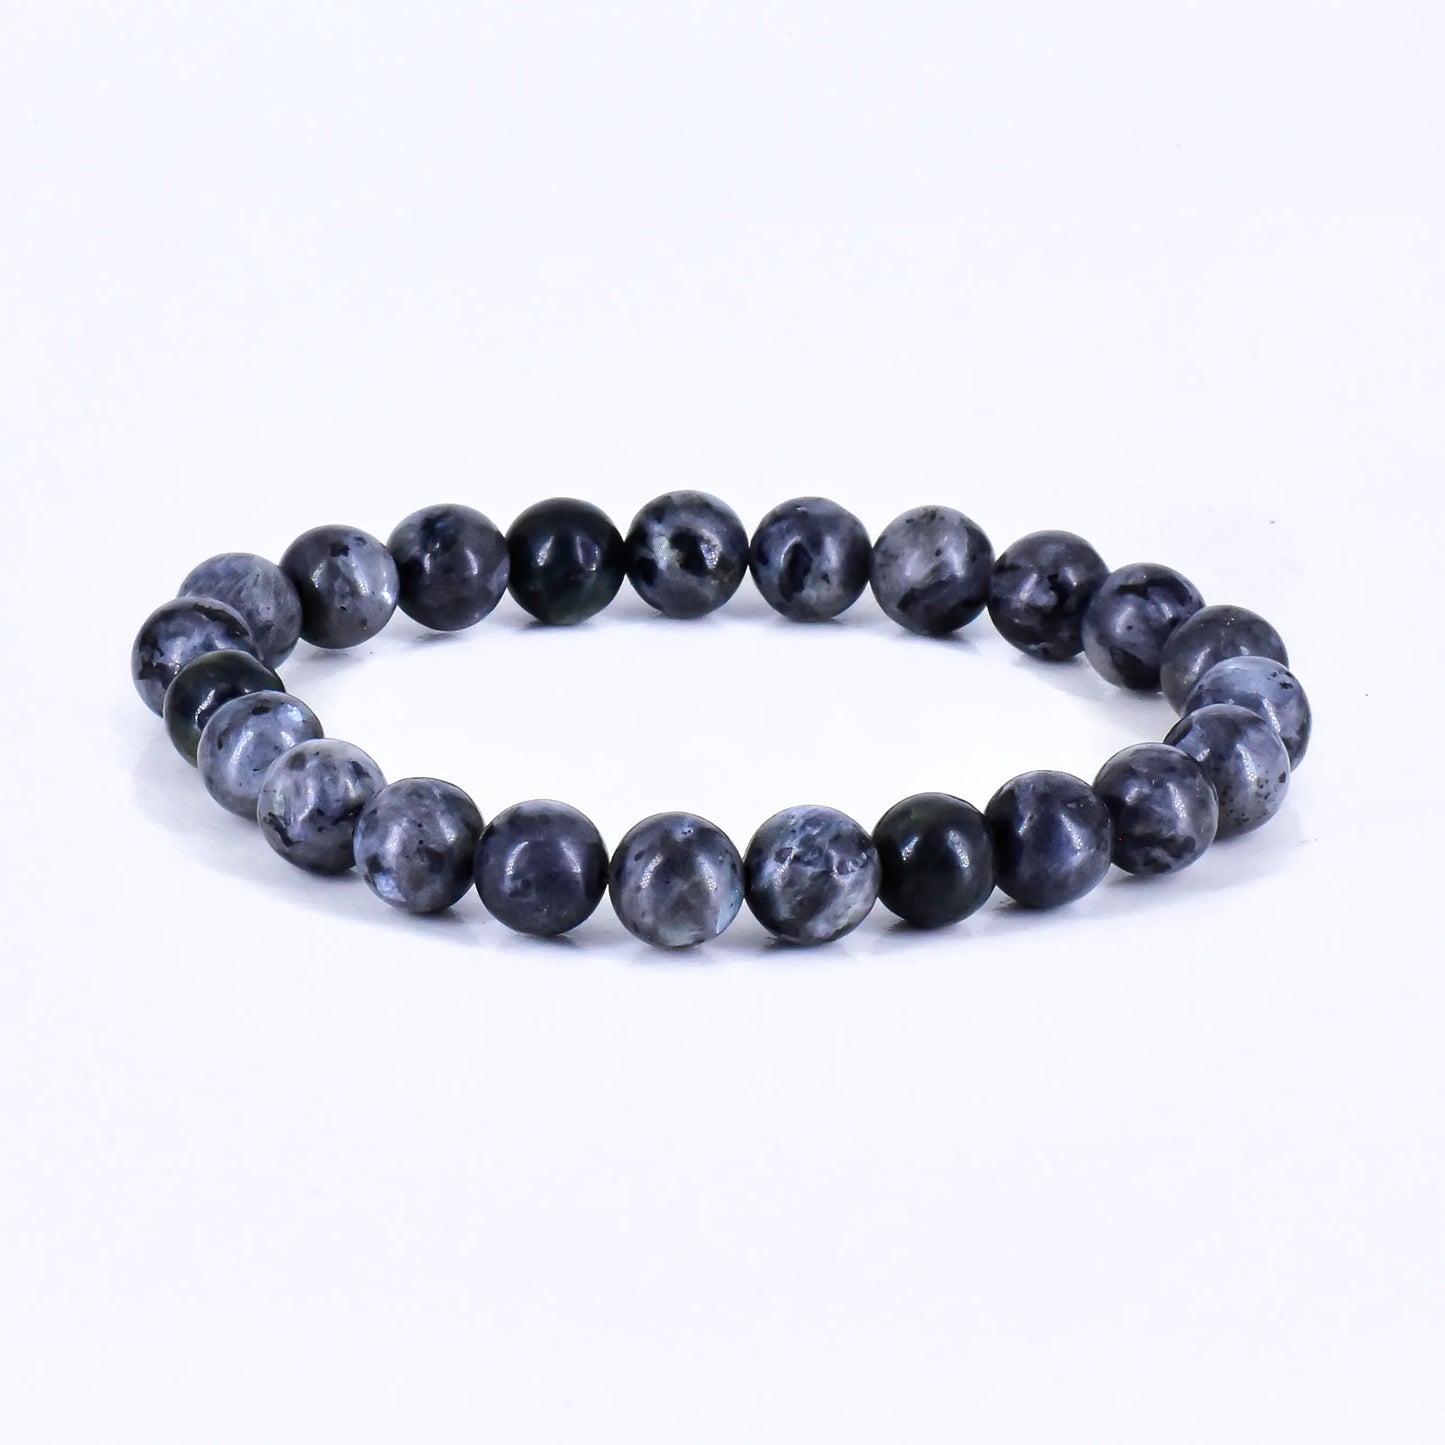 Reshamm Pre-Energized Unisex Premium Larvakite Natural Crystal Stone Bracelet for Inner Strength, Psychic Ability and Protection